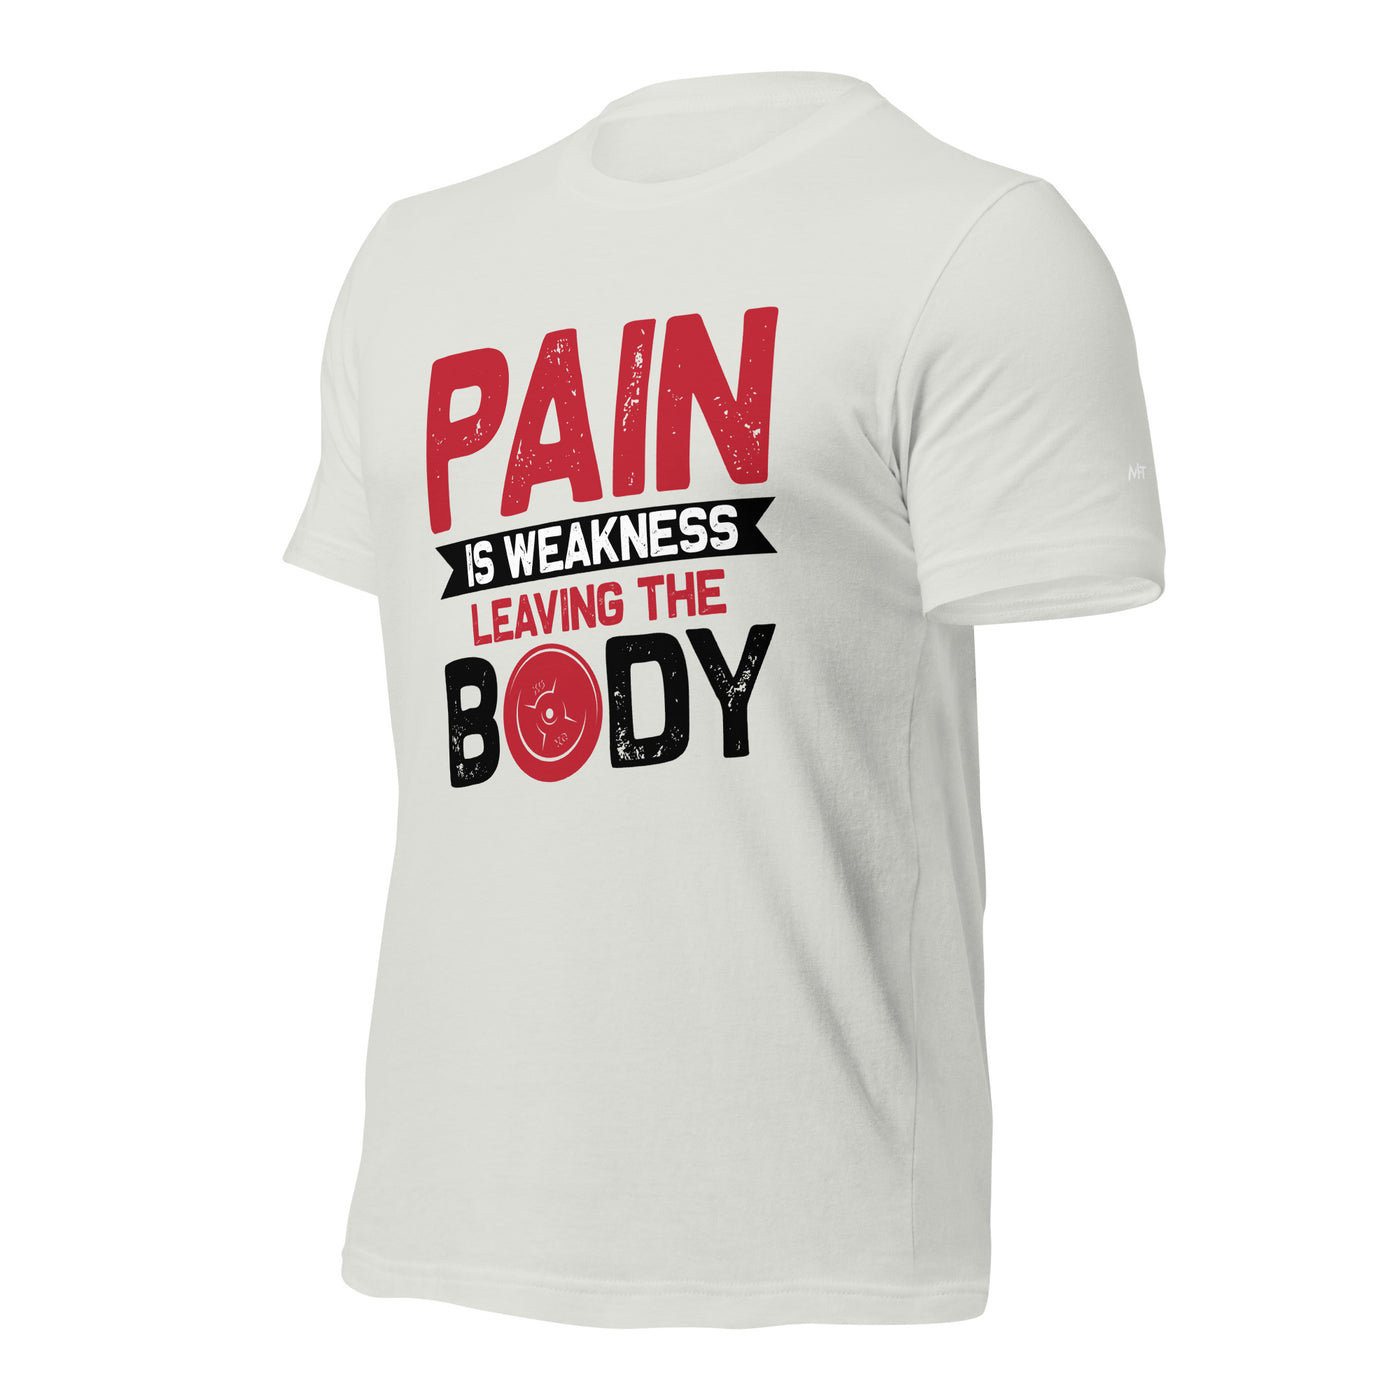 Pain is Weakness Leaving the Body - Unisex t-shirt